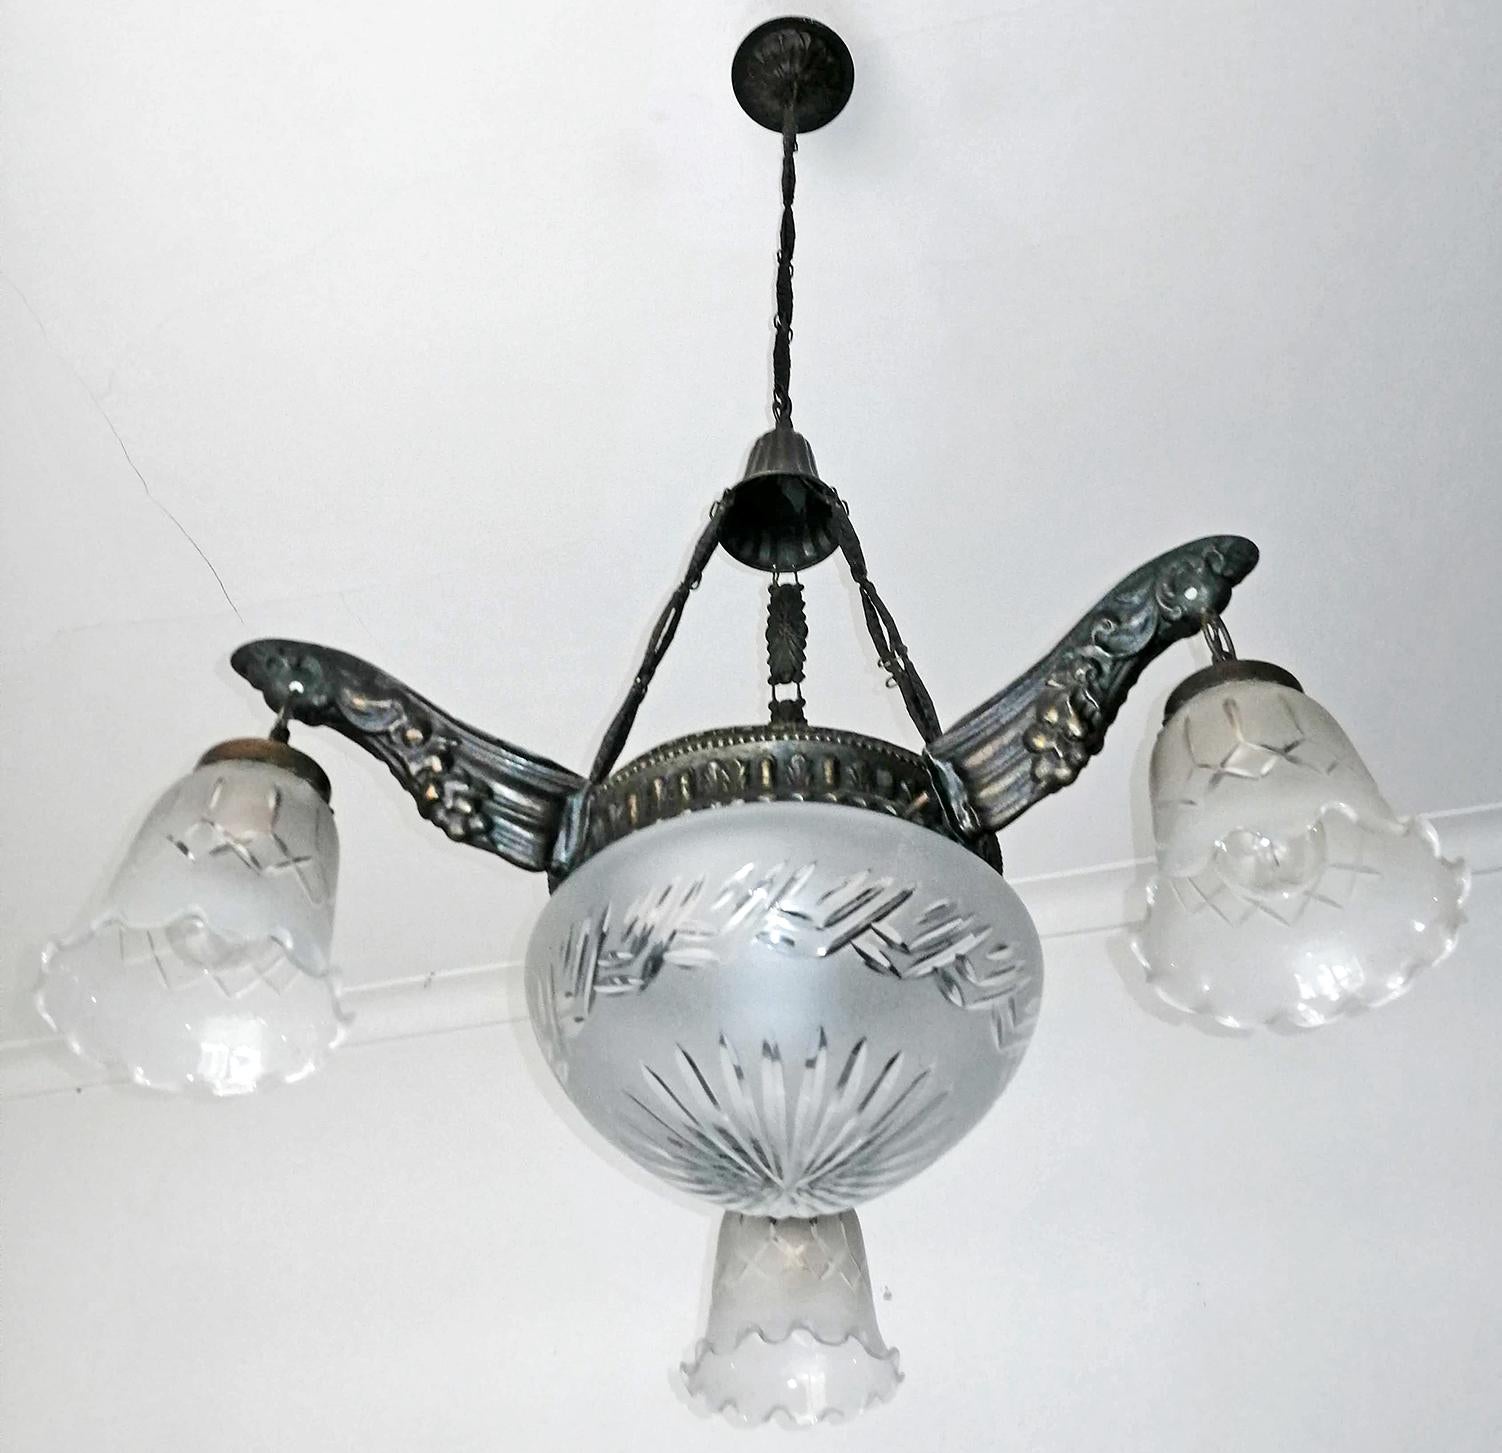 French Degué style Art Deco white frosted cut glass, 4-light chandelier
4-light bulbs E27
Good working condition
Measures:
Diameter 25.6 in / 65 cm
Height 41.3 in (chain 15.7 in)/ 105 cm (chain 40 cm)
Weight: 11 lb. (5 kg).
Assembly required.